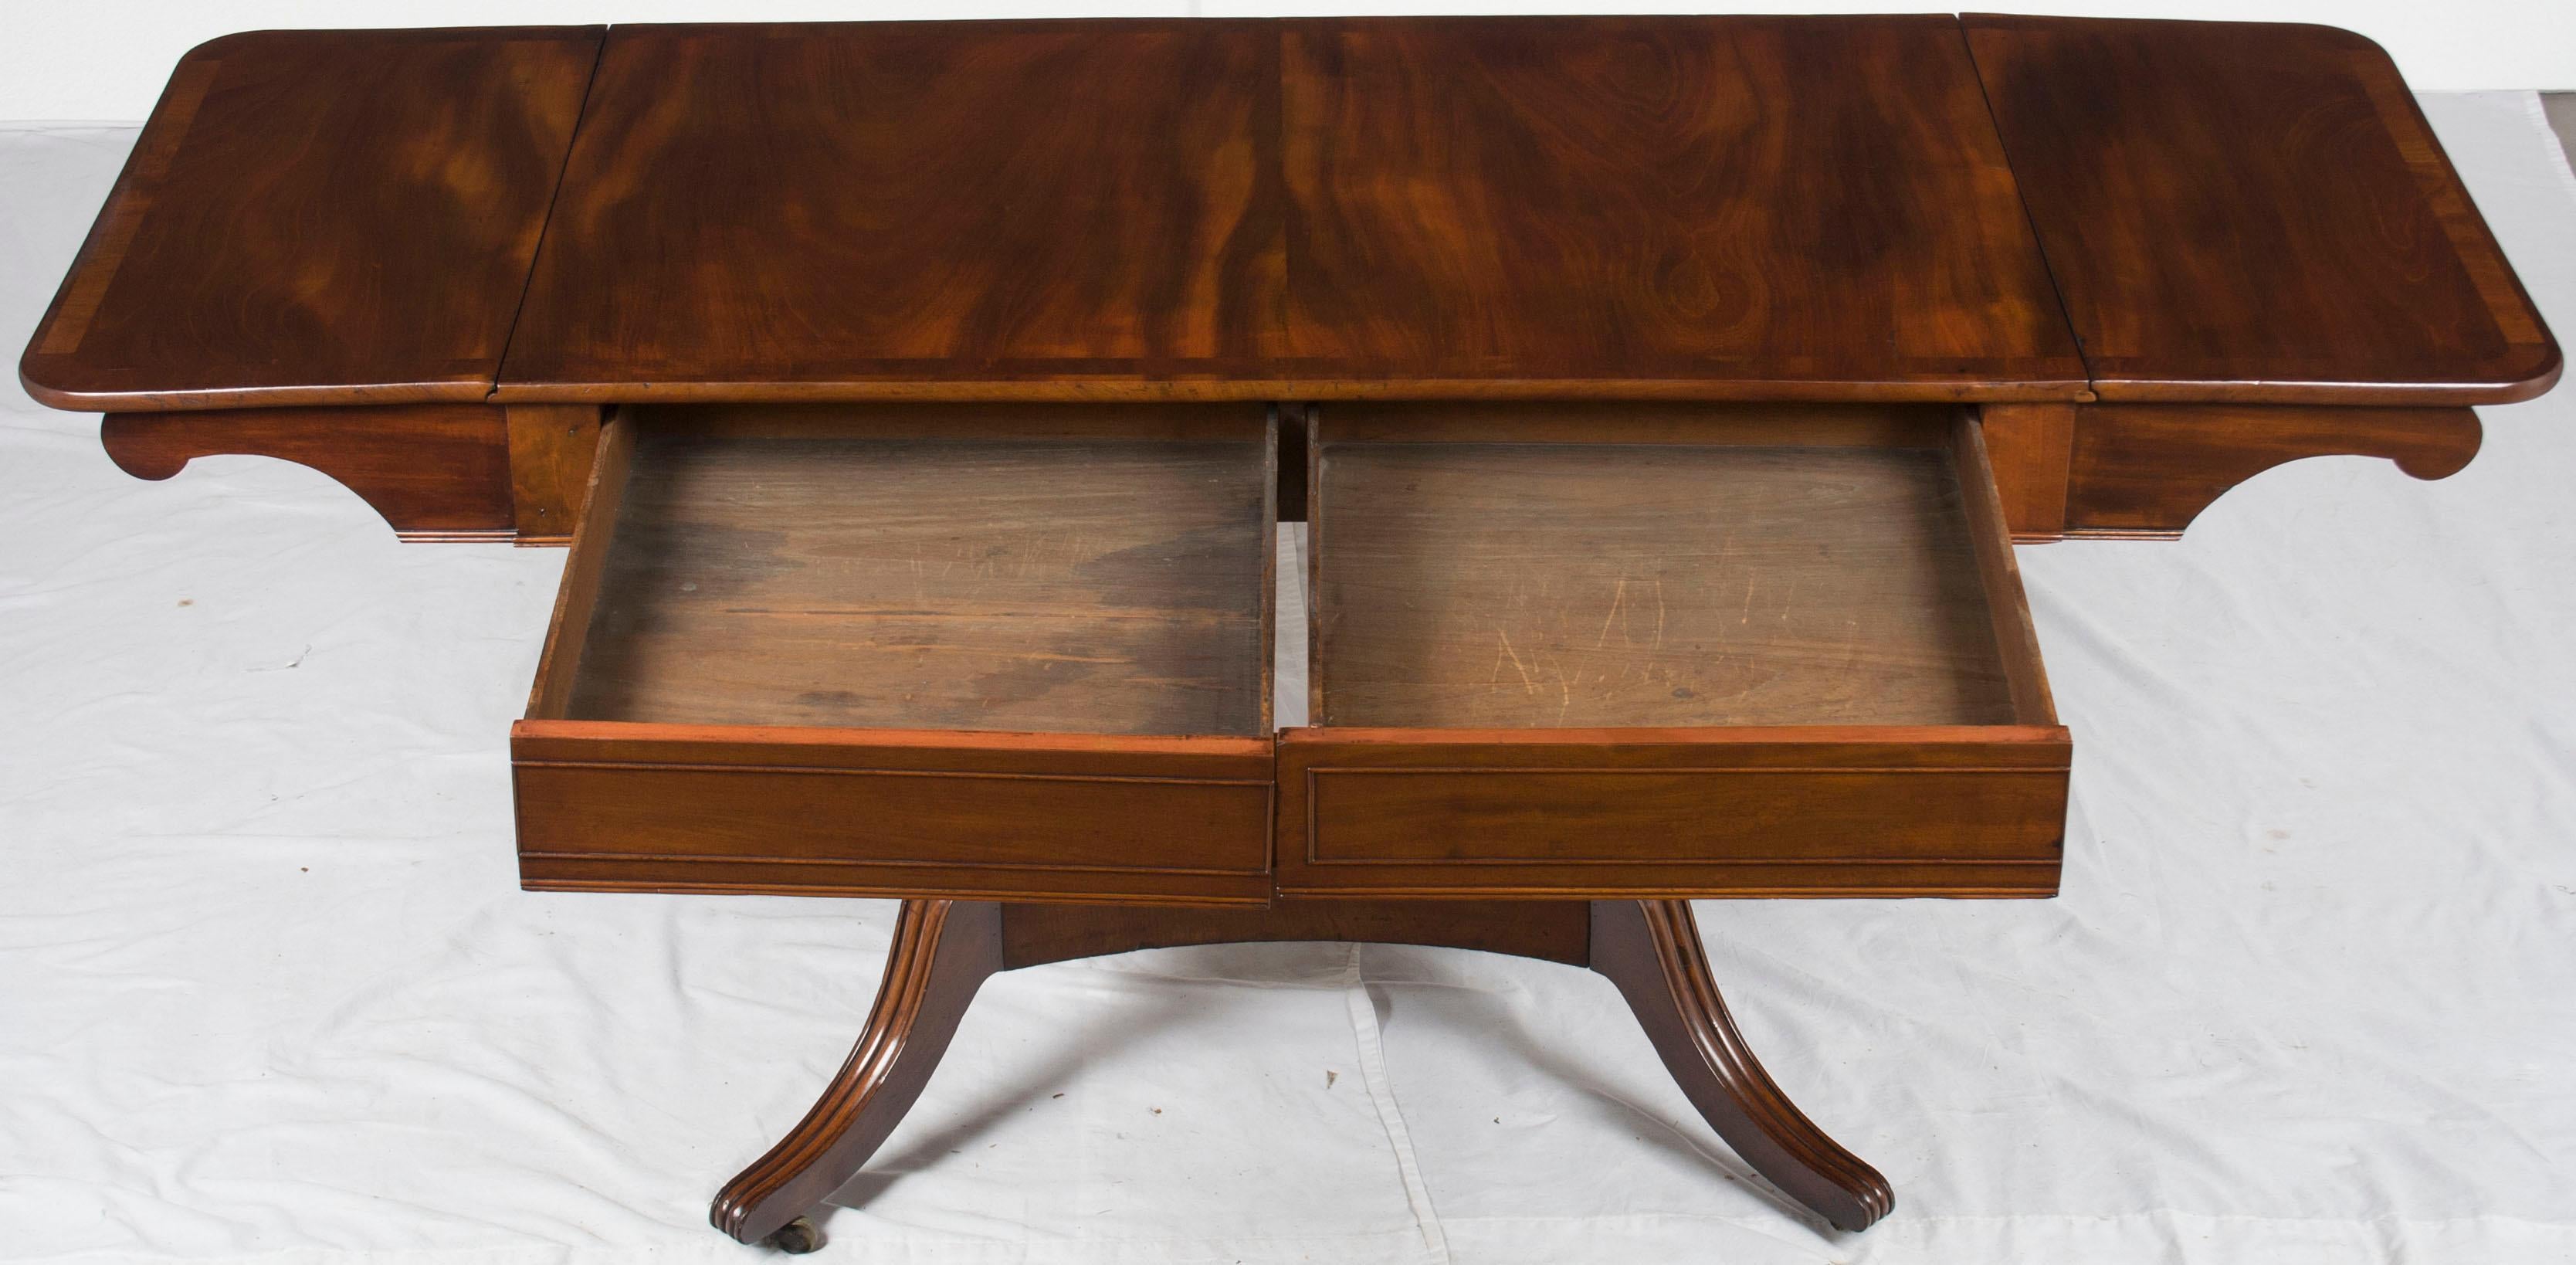 You can use this gorgeous piece as either a small drop-leaf desk or a stunning sofa table. It’s great size, beautiful design, and unique wood all really lend themselves to today’s styles.

The most distinguishing feature of this sofa table is the